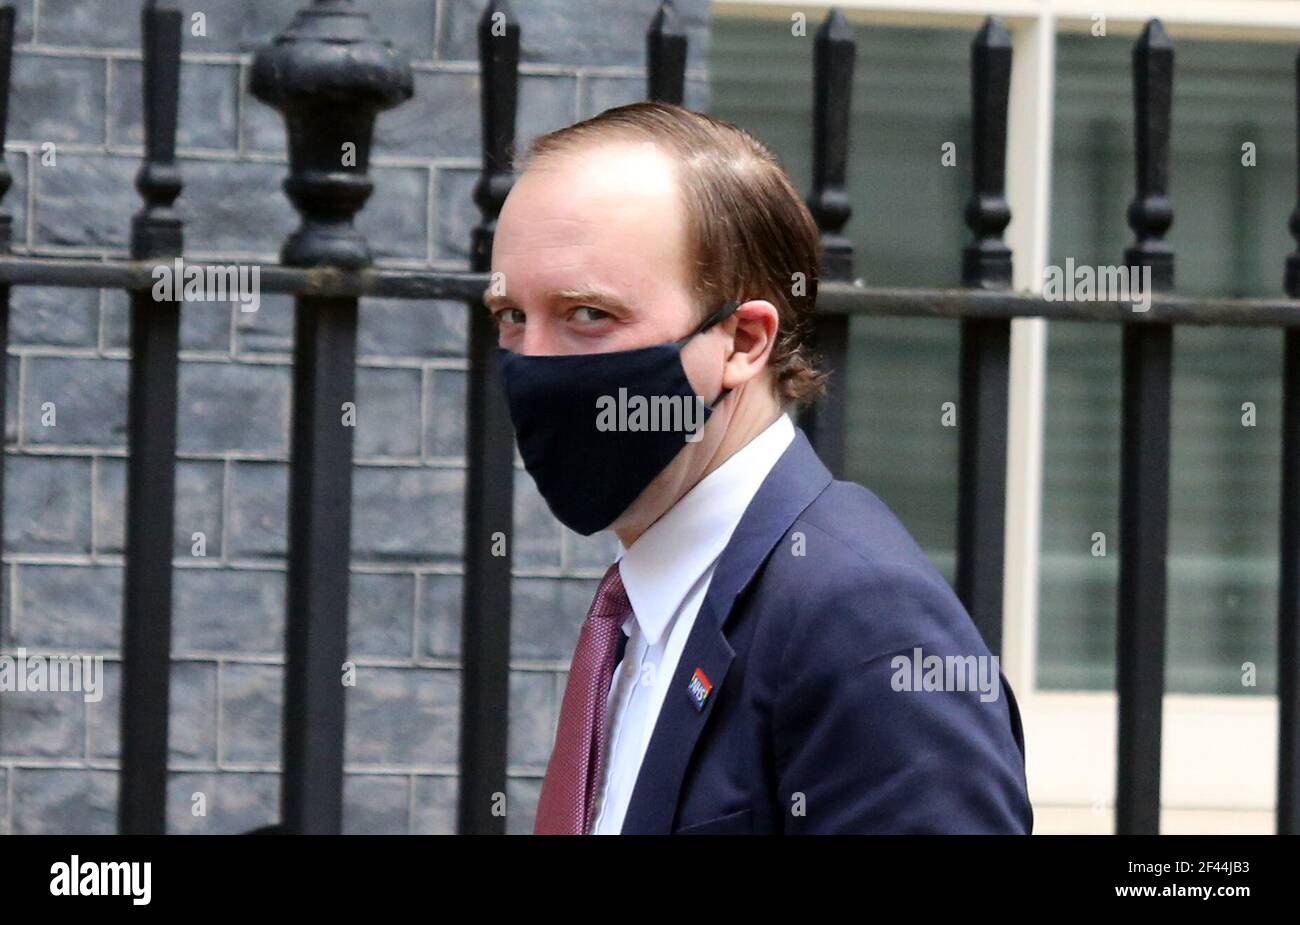 London, England, UK. 19th Mar, 2021. Secretary of State for Health and Social Care MATT HANCOCK is seen arriving at 10 Downing Street as PM Boris Johnson gets ready to get Astra Zeneca vaccine today. Credit: Tayfun Salci/ZUMA Wire/Alamy Live News Stock Photo